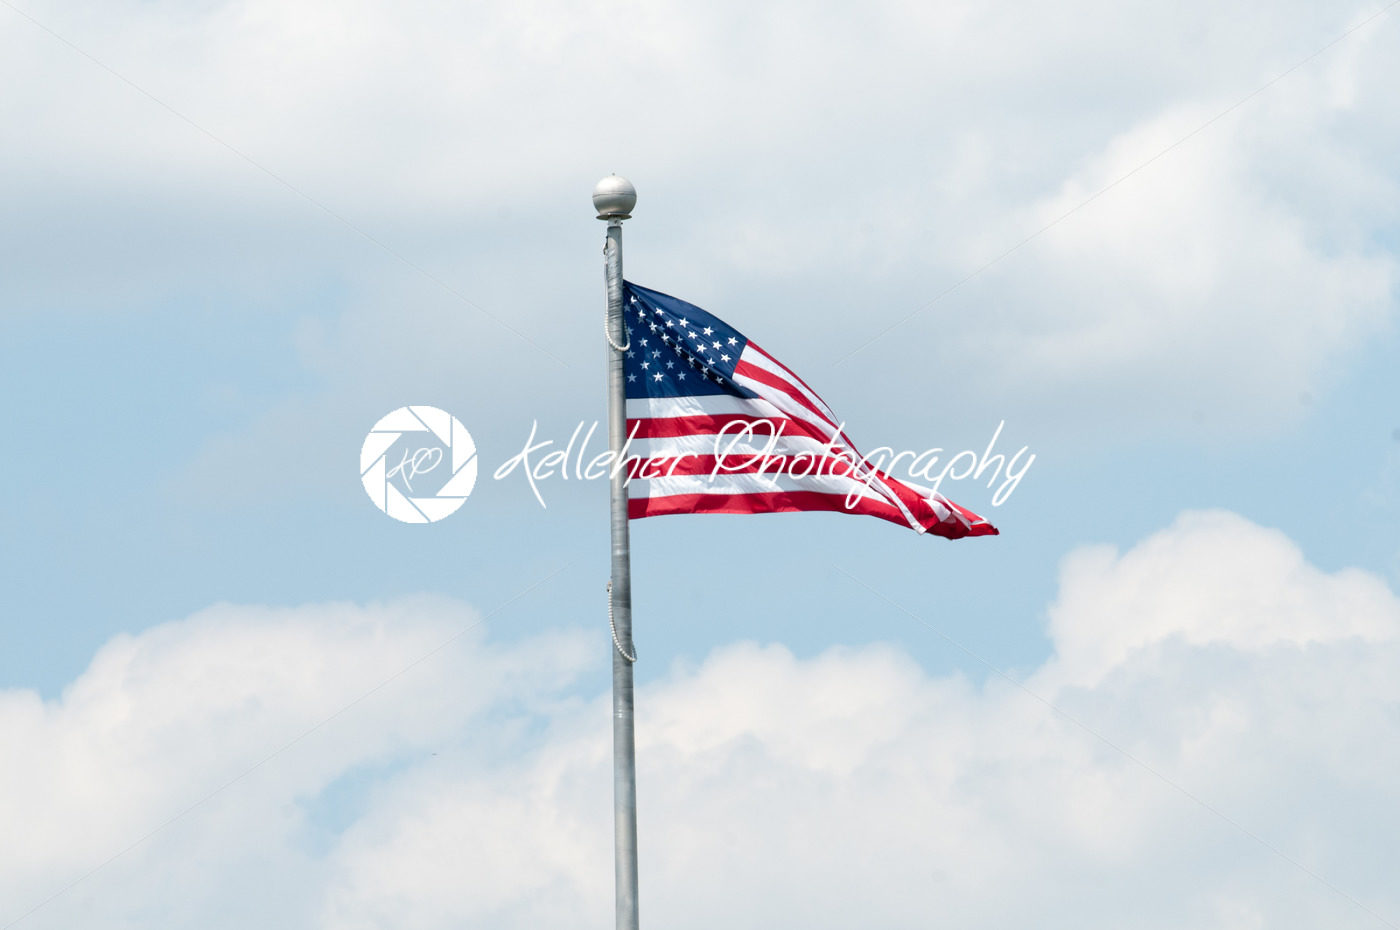 Flag of the United States of America with blue sky and clouds behind it - Kelleher Photography Store